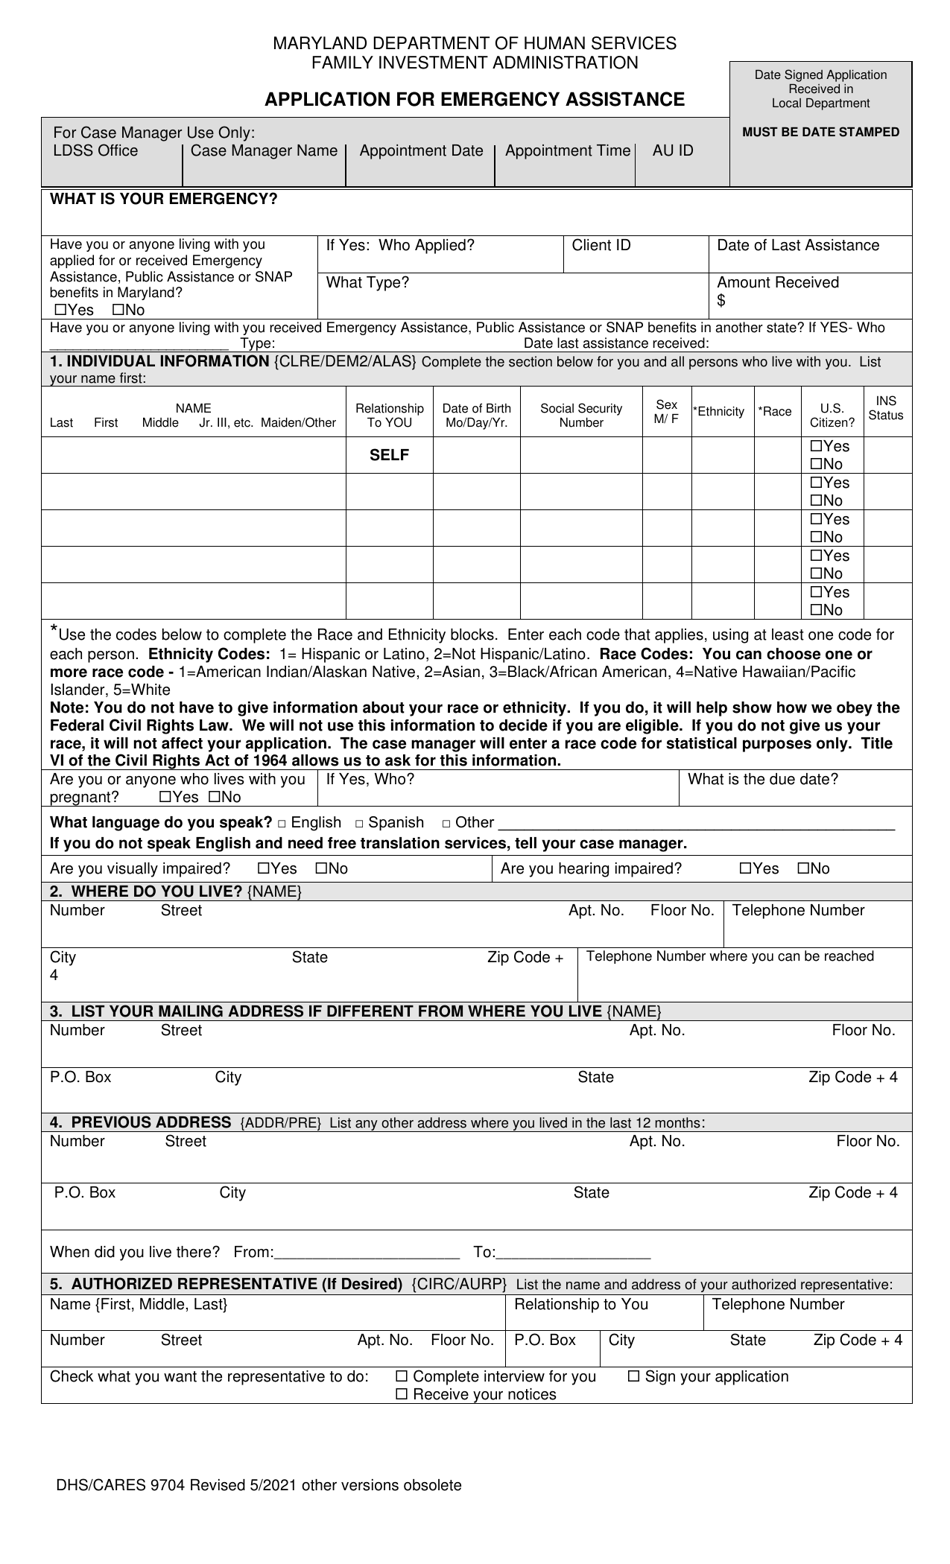 Form DHS / CARES9704 Application for Emergency Assistance - Maryland, Page 1